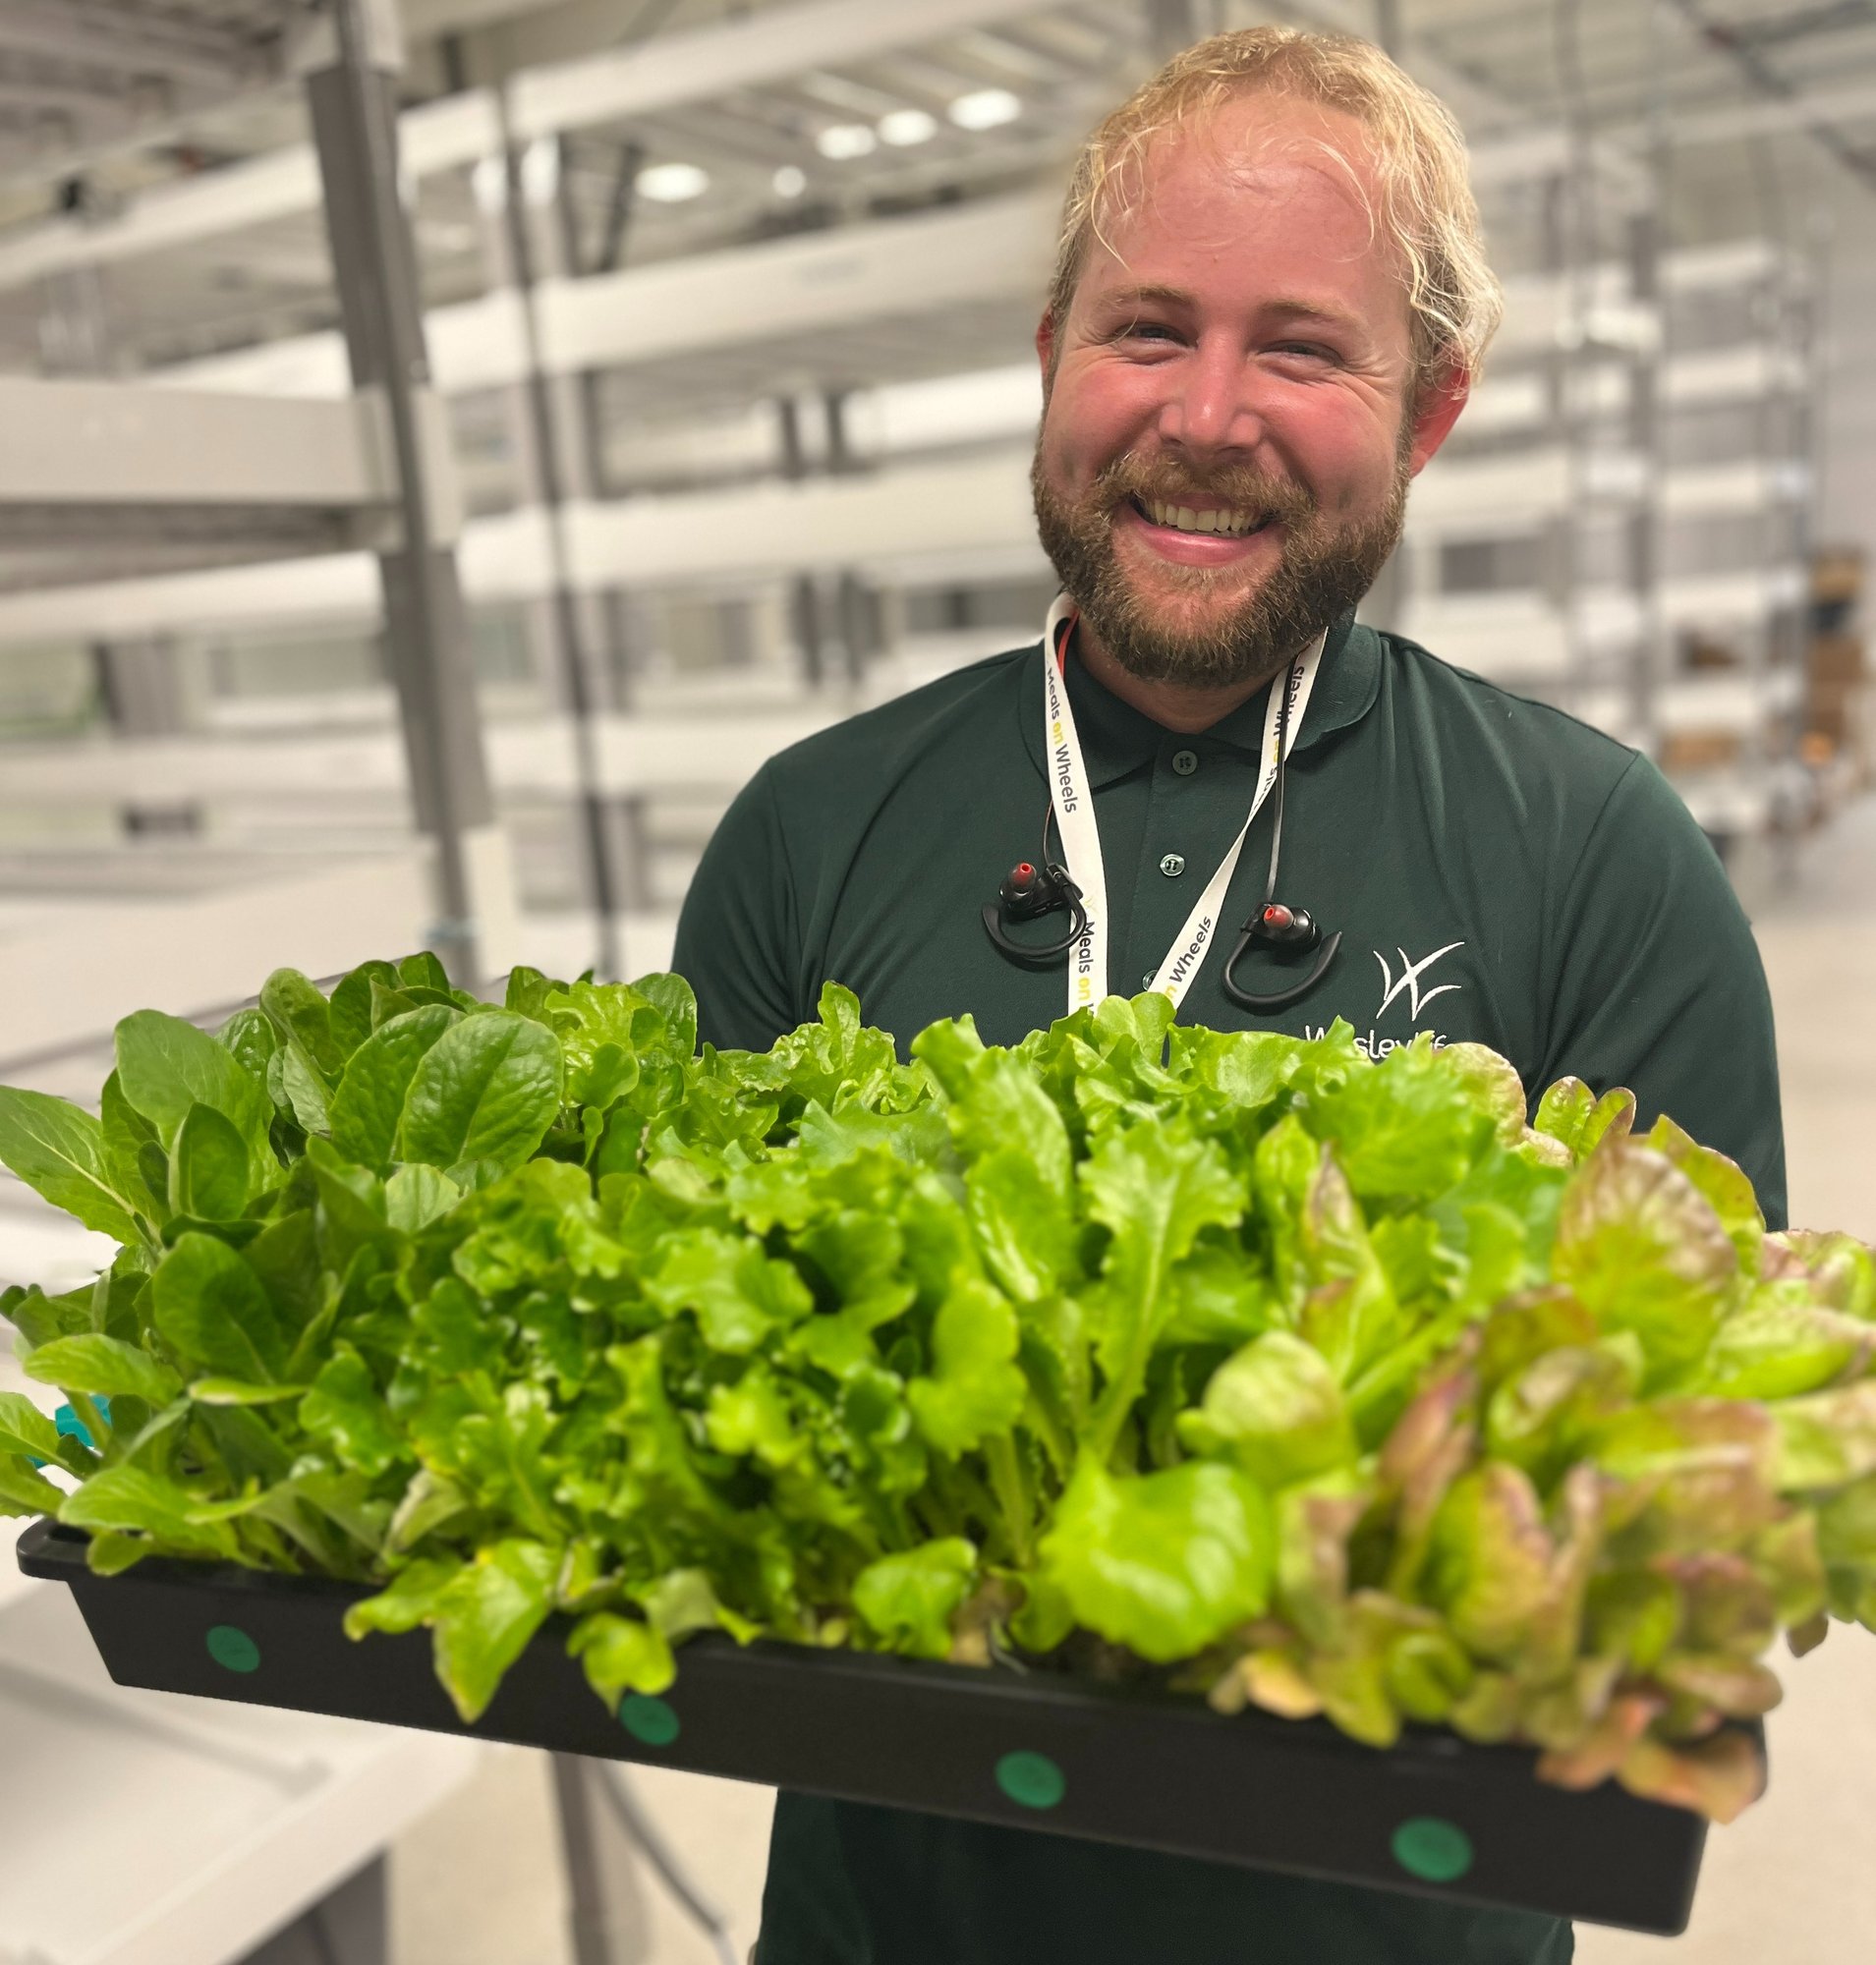 A farmer smiling and holding a tray of hydroponic greens